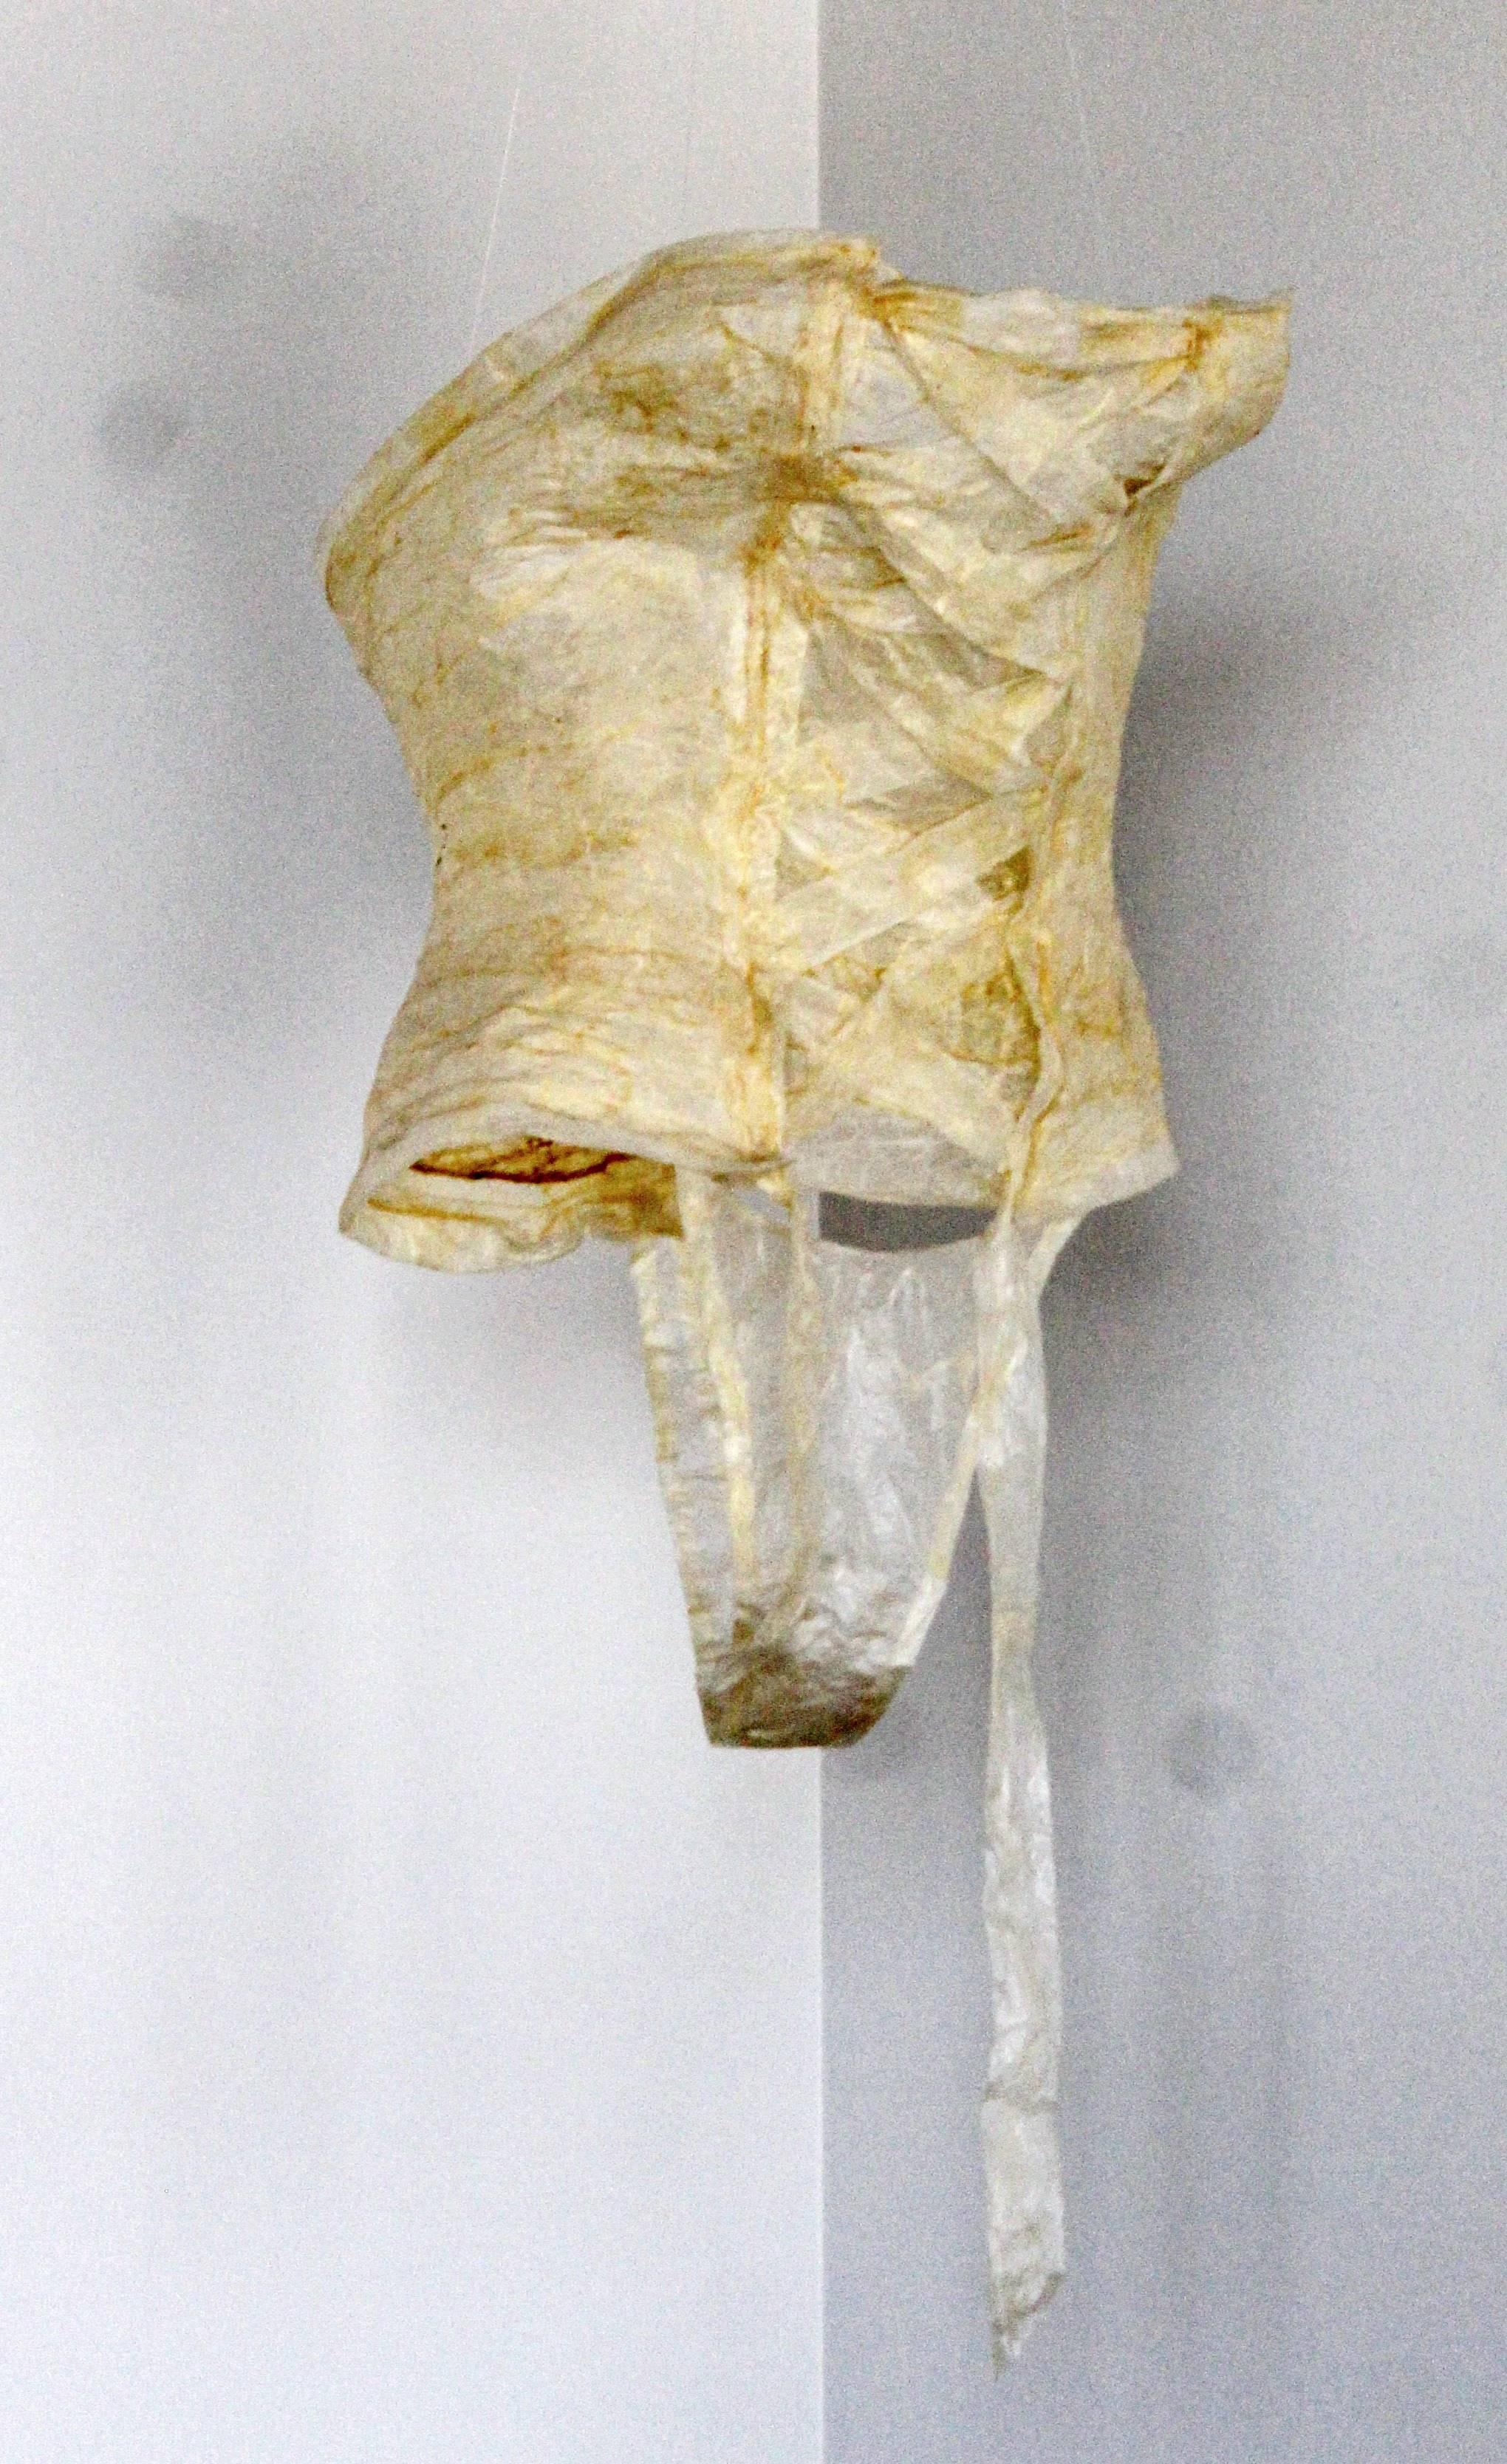 For your consideration is a unique, hanging sculpture of a bustier, made of hot dog casings, by Cristin Richard. In excellent condition. The dimensions are 14